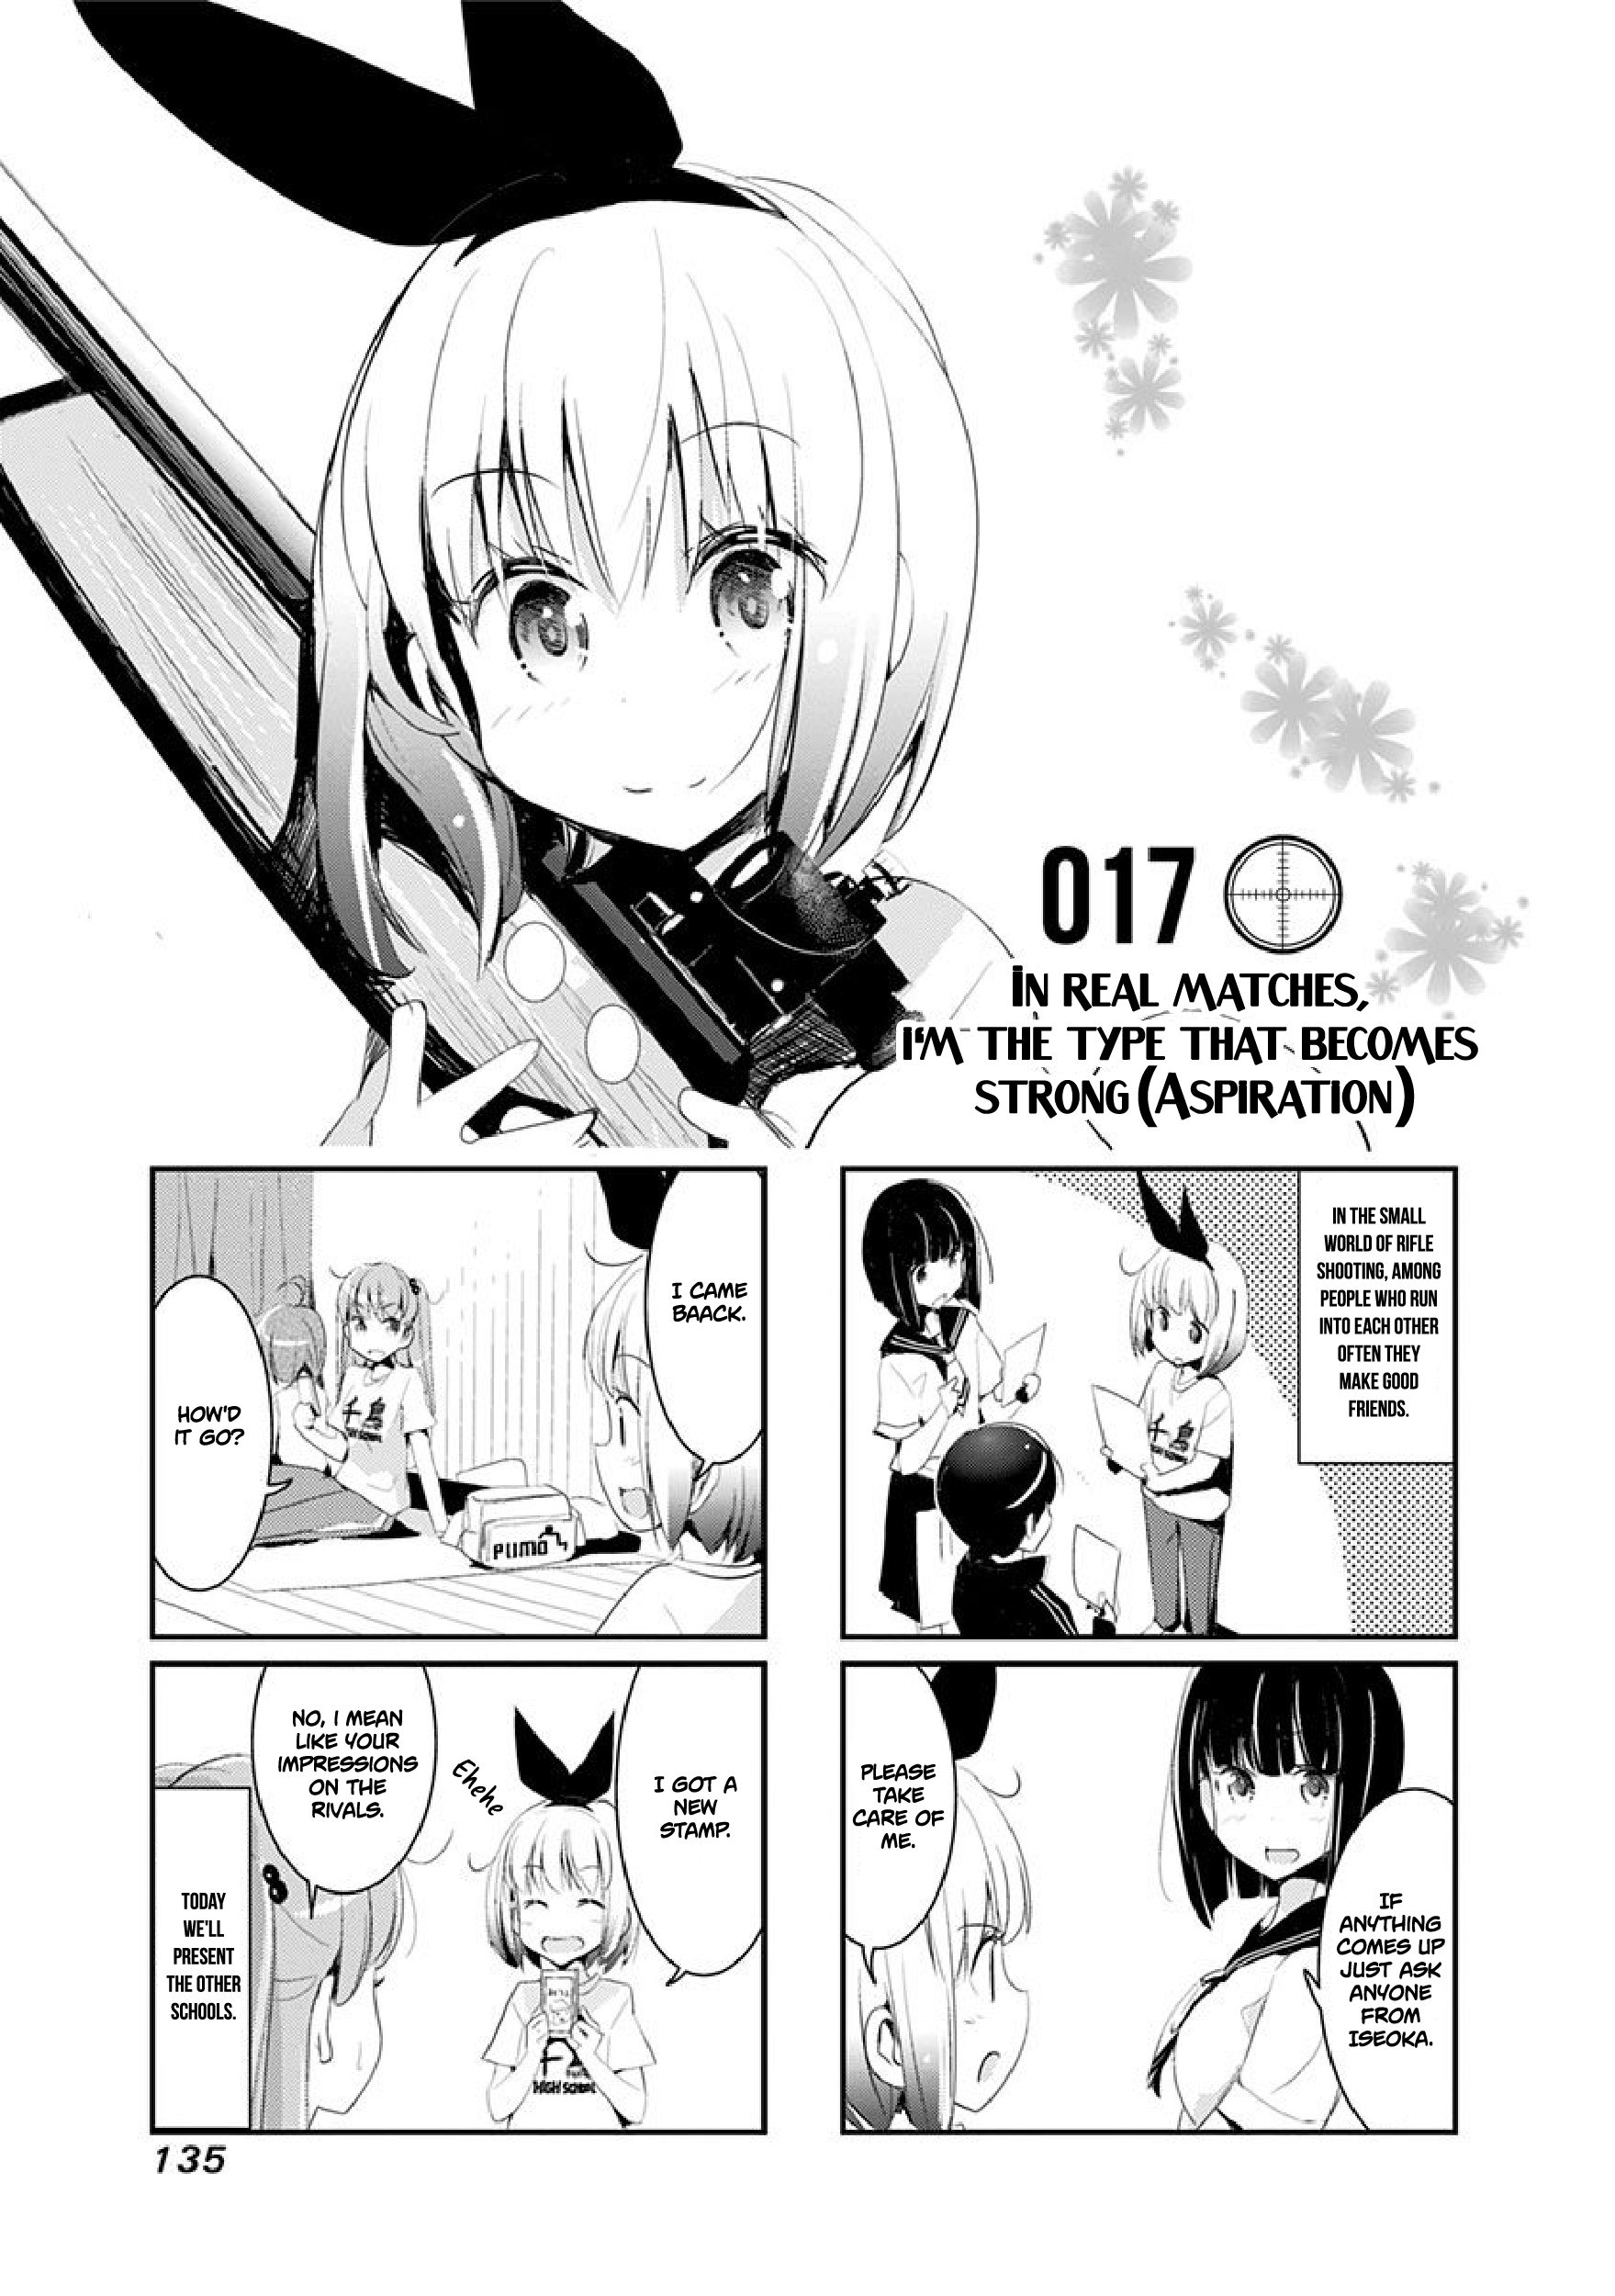 Rifle Is Beautiful Vol.1 Chapter 17: In Real Matches, I'm The Type That Becomes Strong (Aspiration) - Picture 2